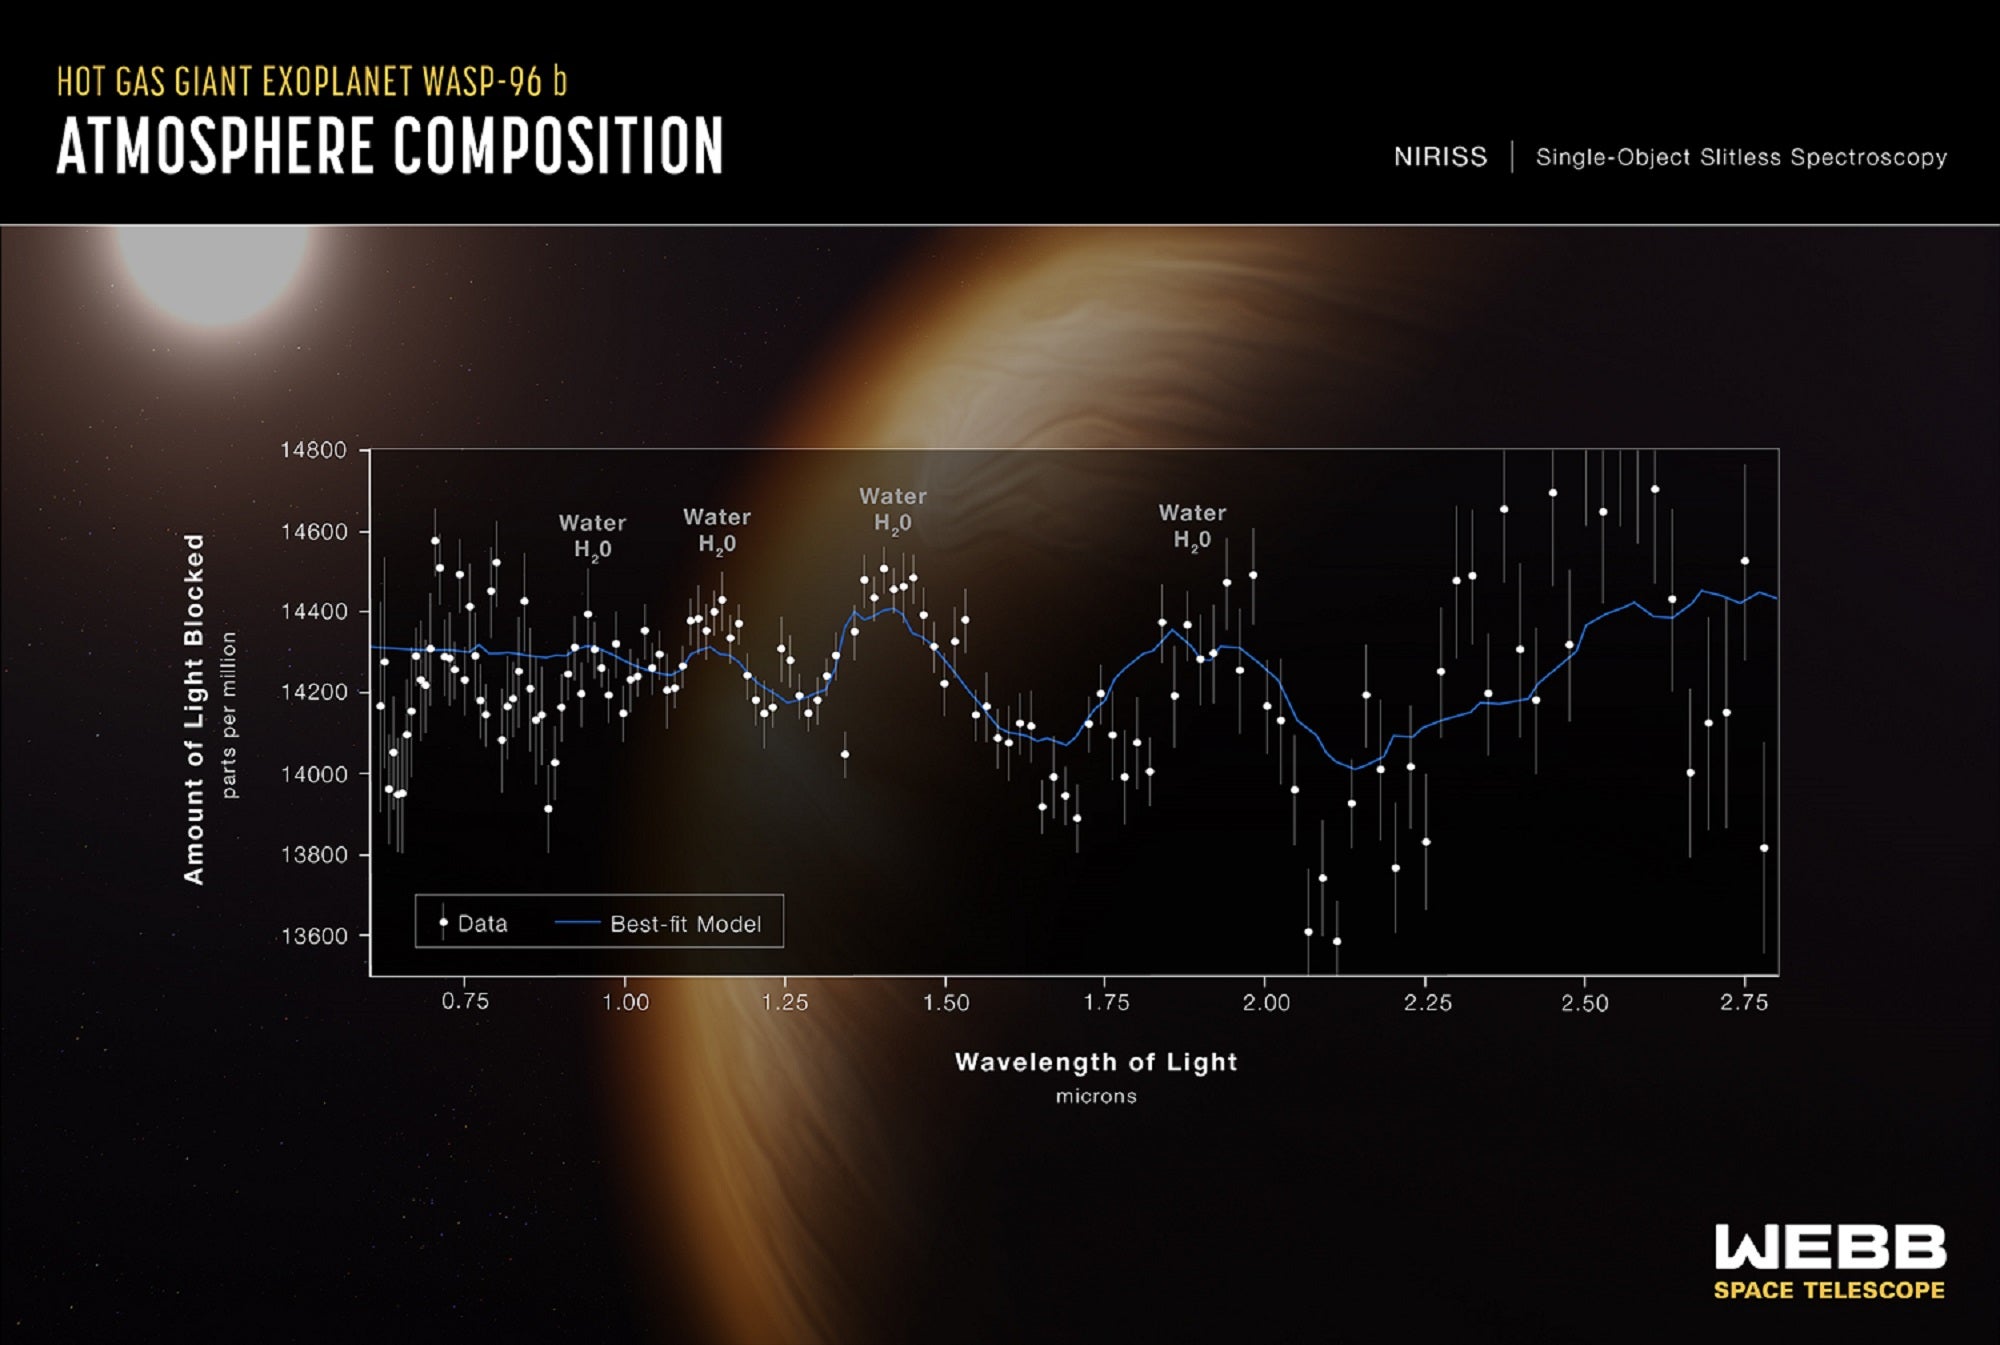 Line graph of water particles detected in wavelengths of light from exoplanet WASP-96 b by the James Webb Space Telescope